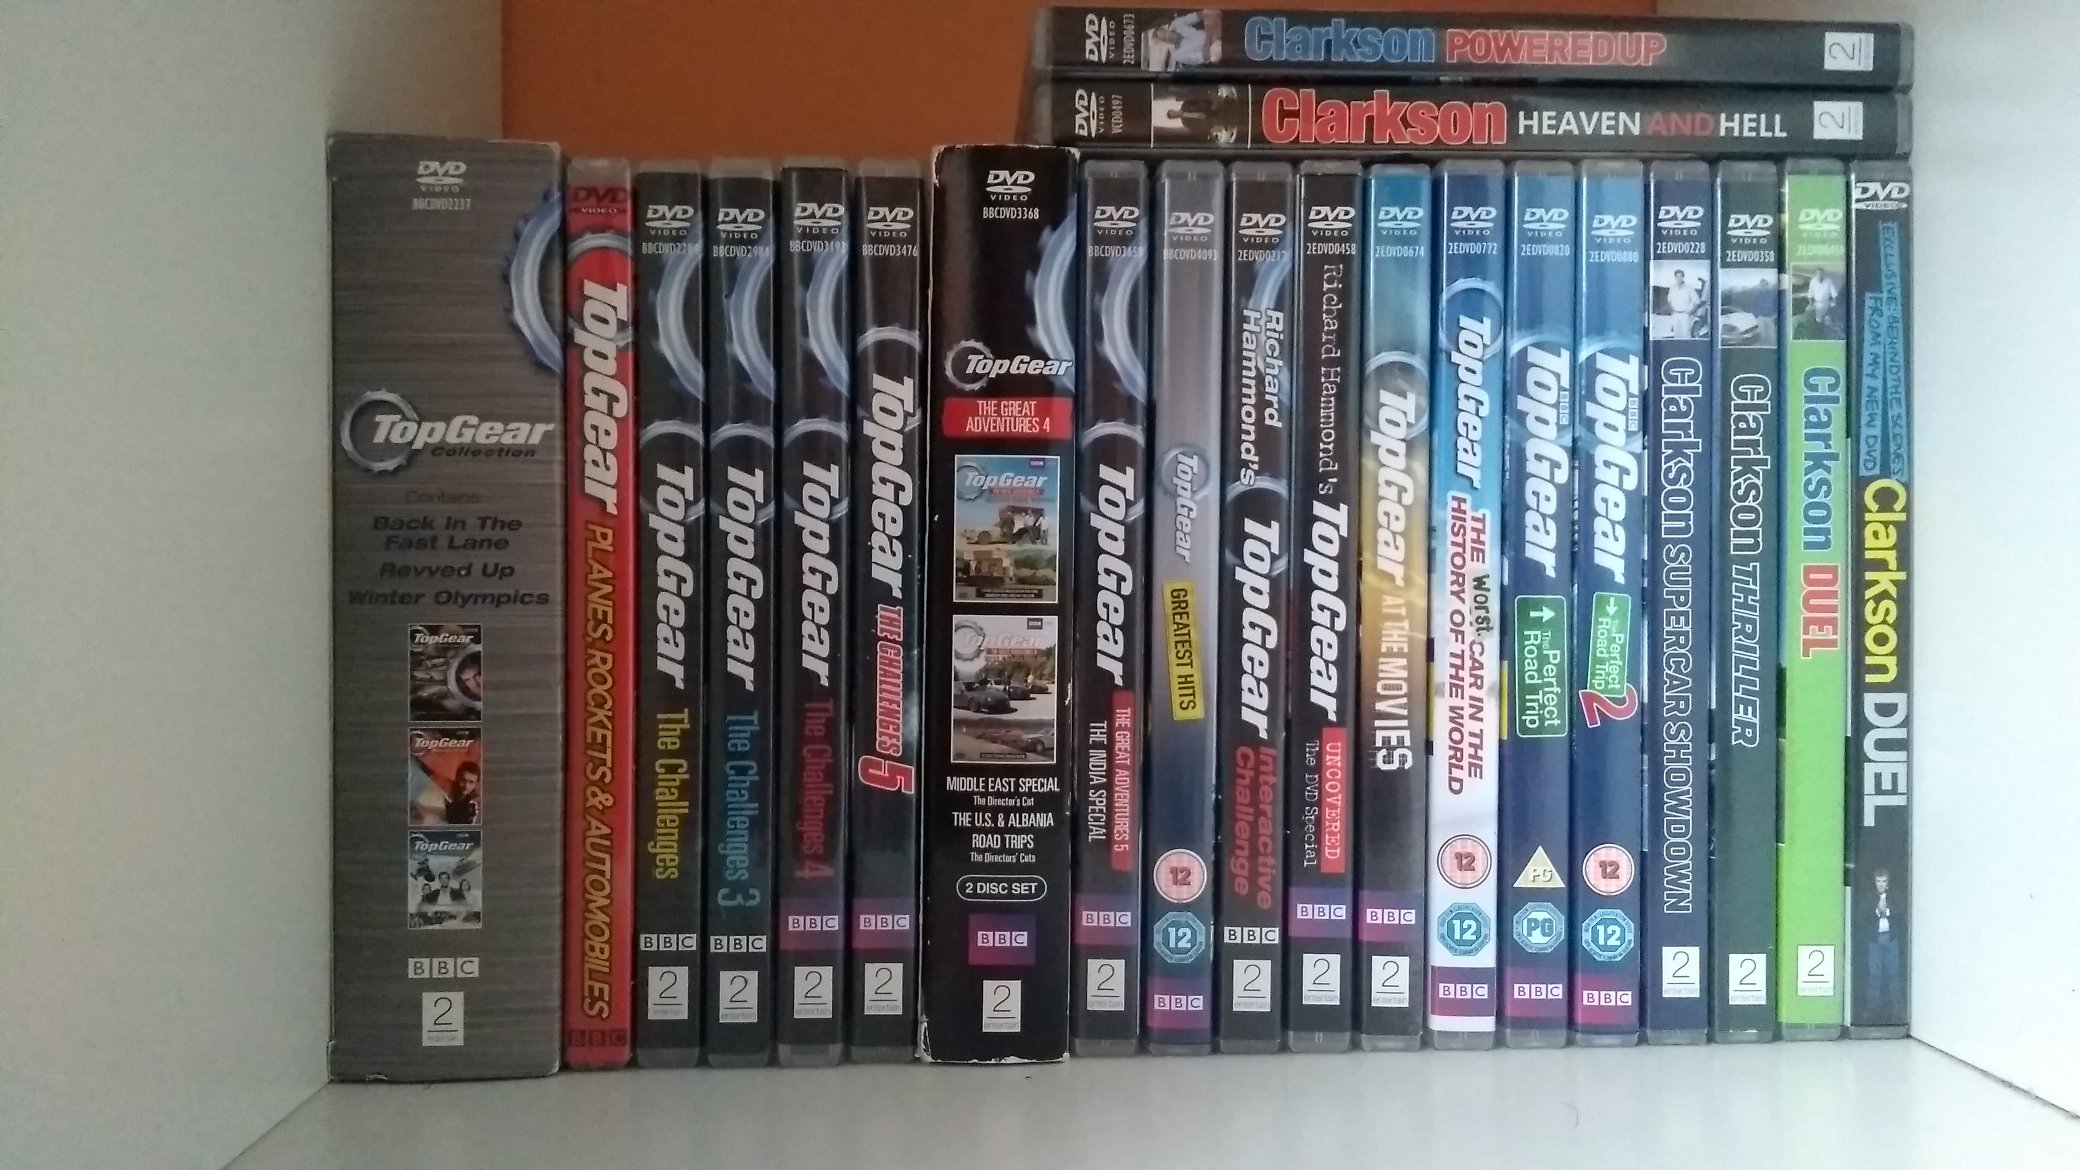 Top Gear DVD collection | Beefy Lore Wiki |